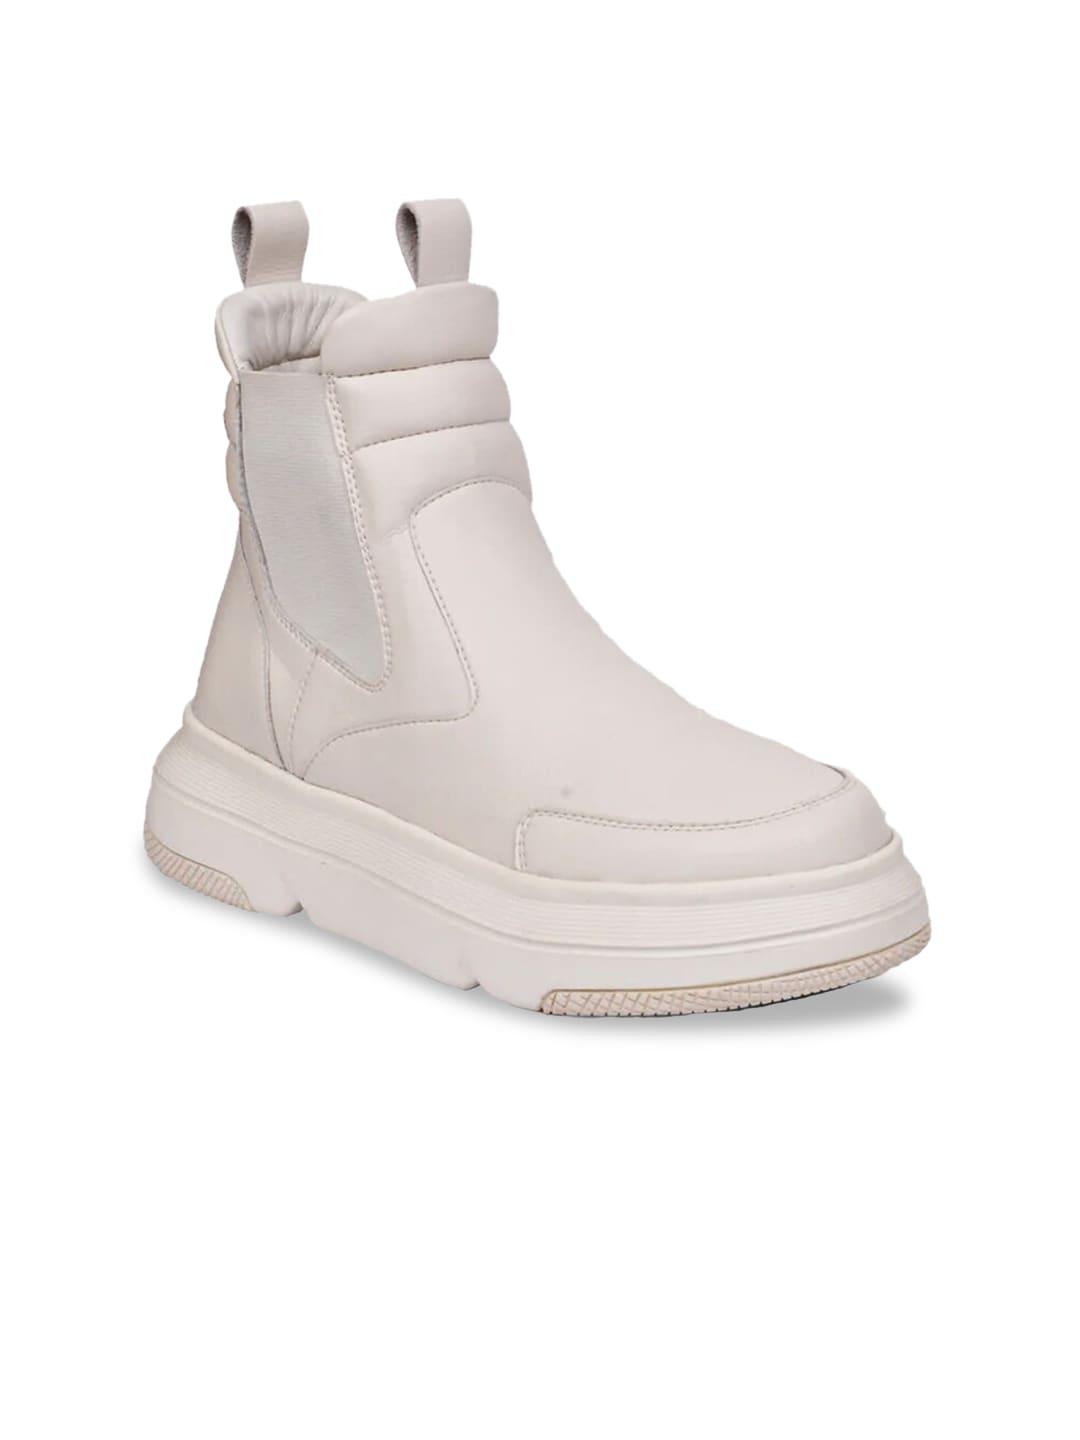 saint-g-women-white-solid-leather-winter-boot